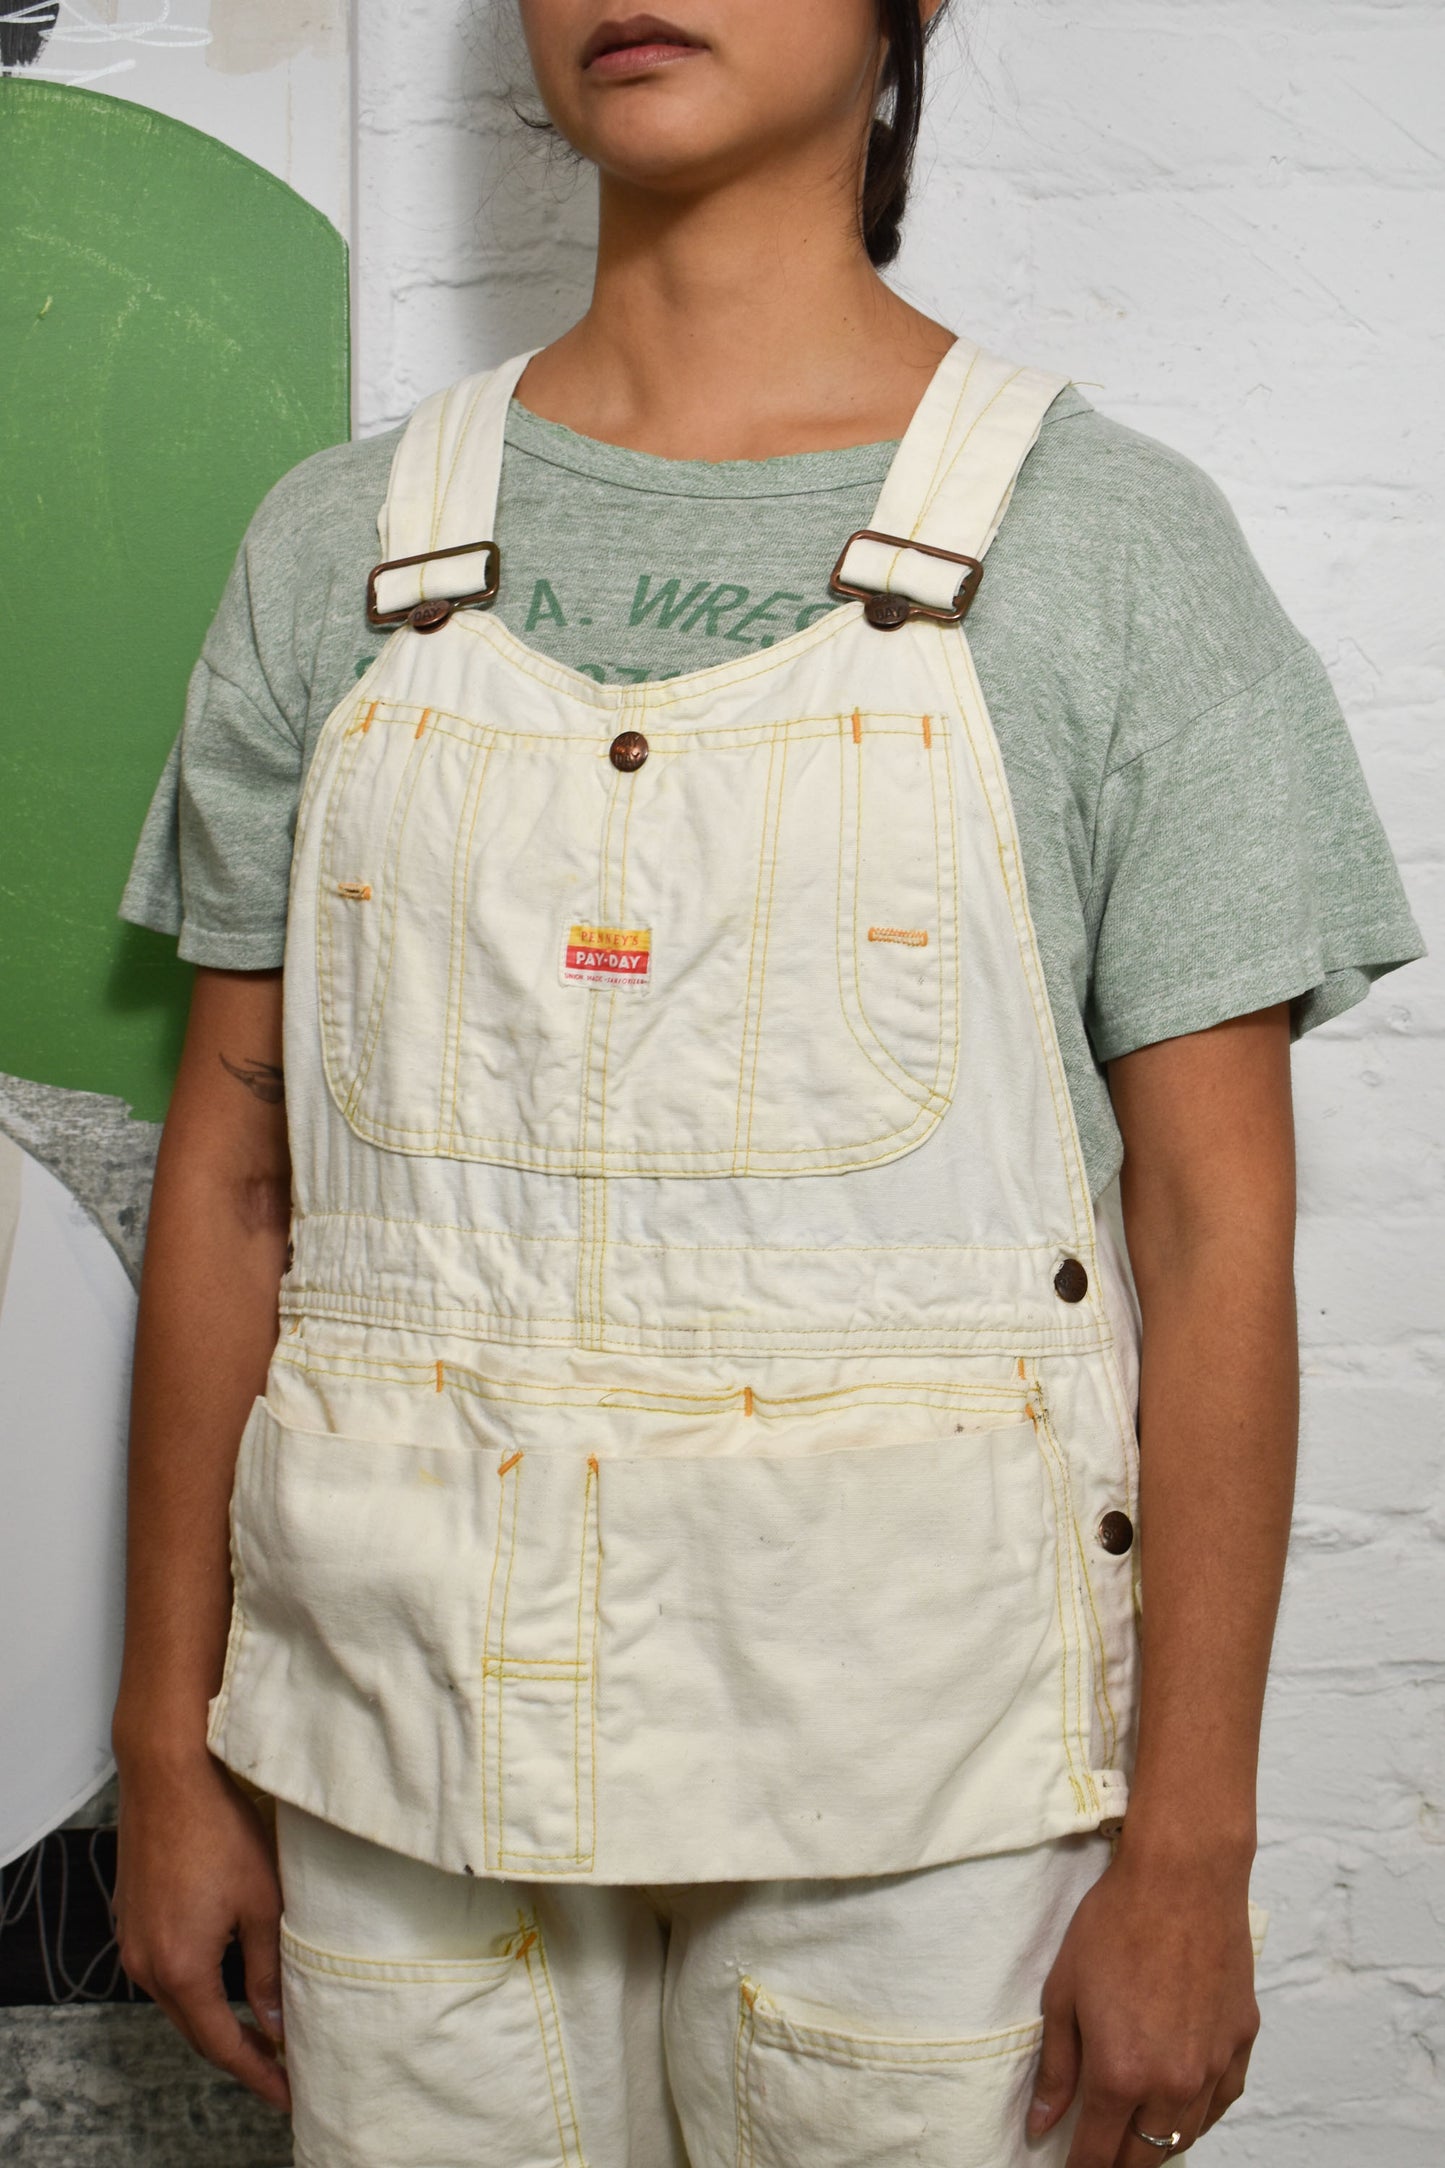 Vintage 1950's "Penney's Payday" White Carpenter Overalls